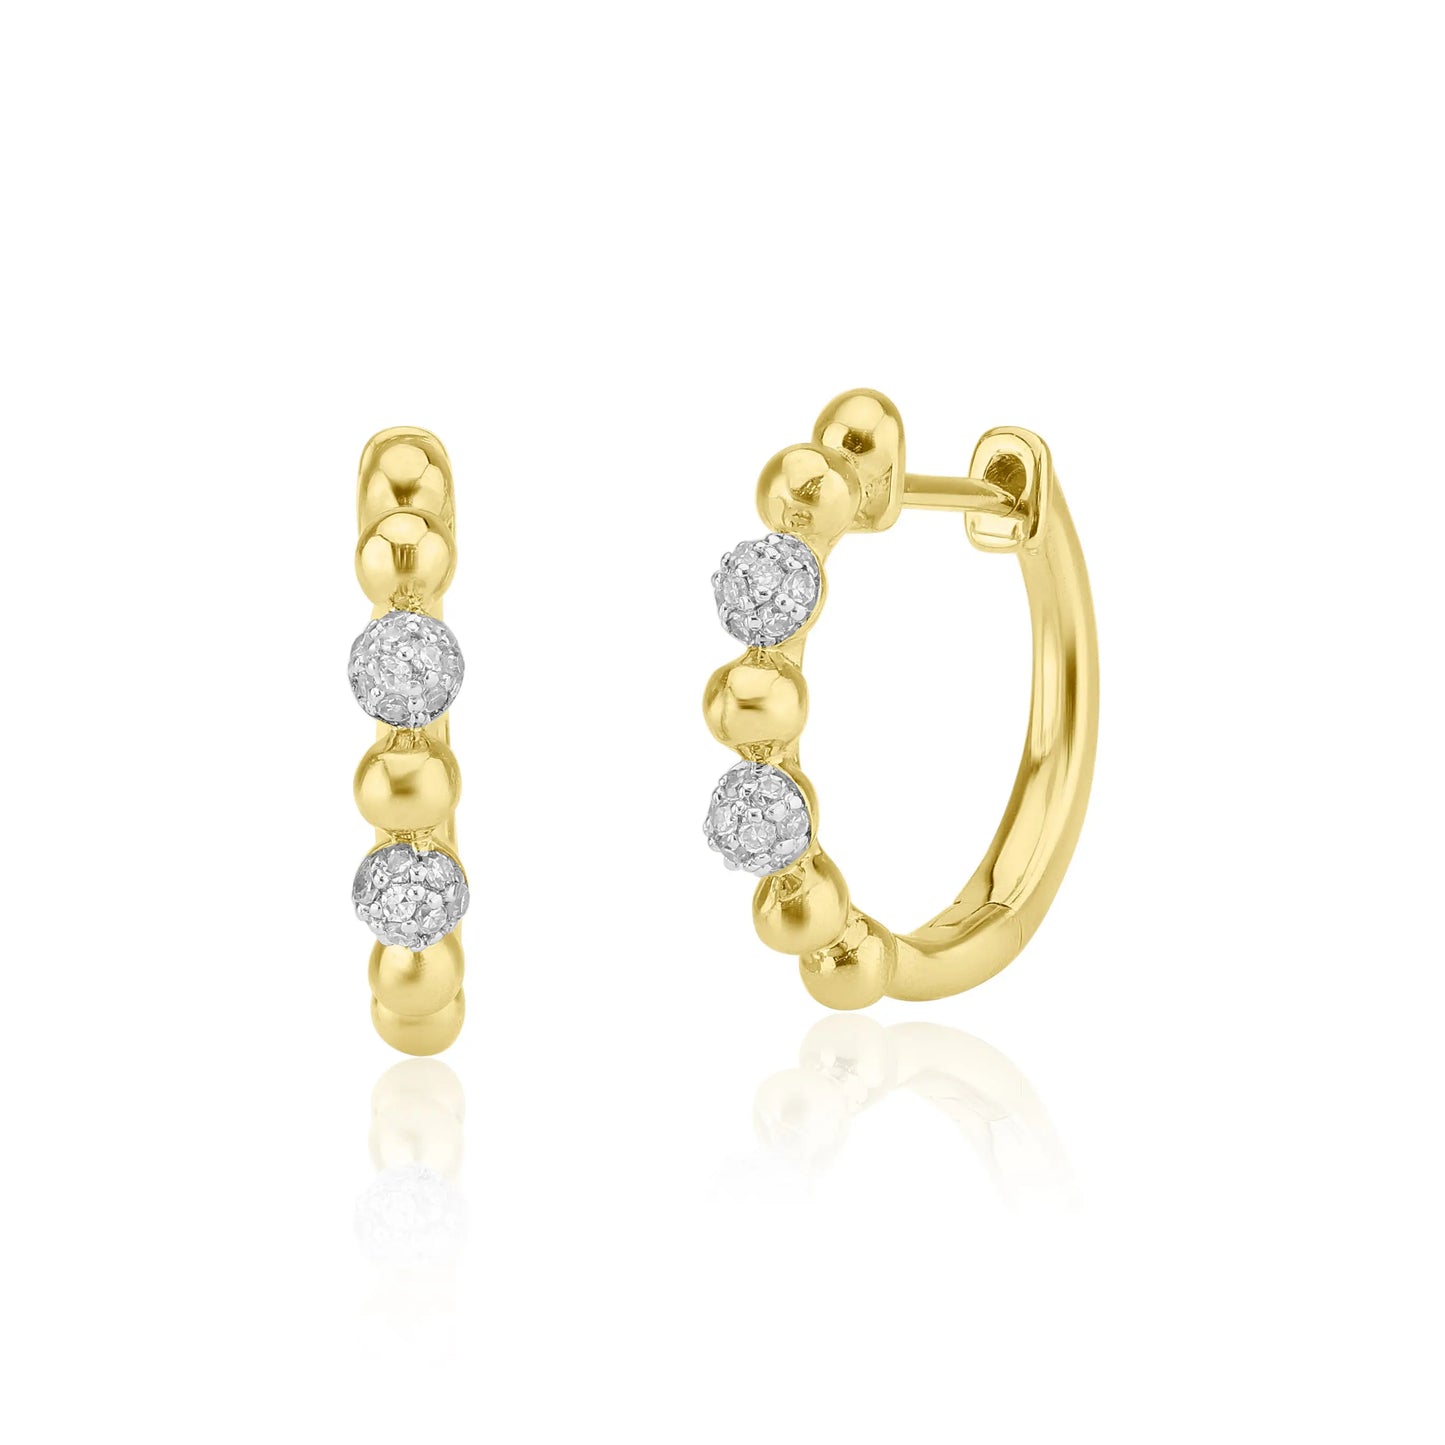 White Gold Earrings Yellow Gold and Diamond Hoop Earrings Danson Jewelers Danson Jewelers 